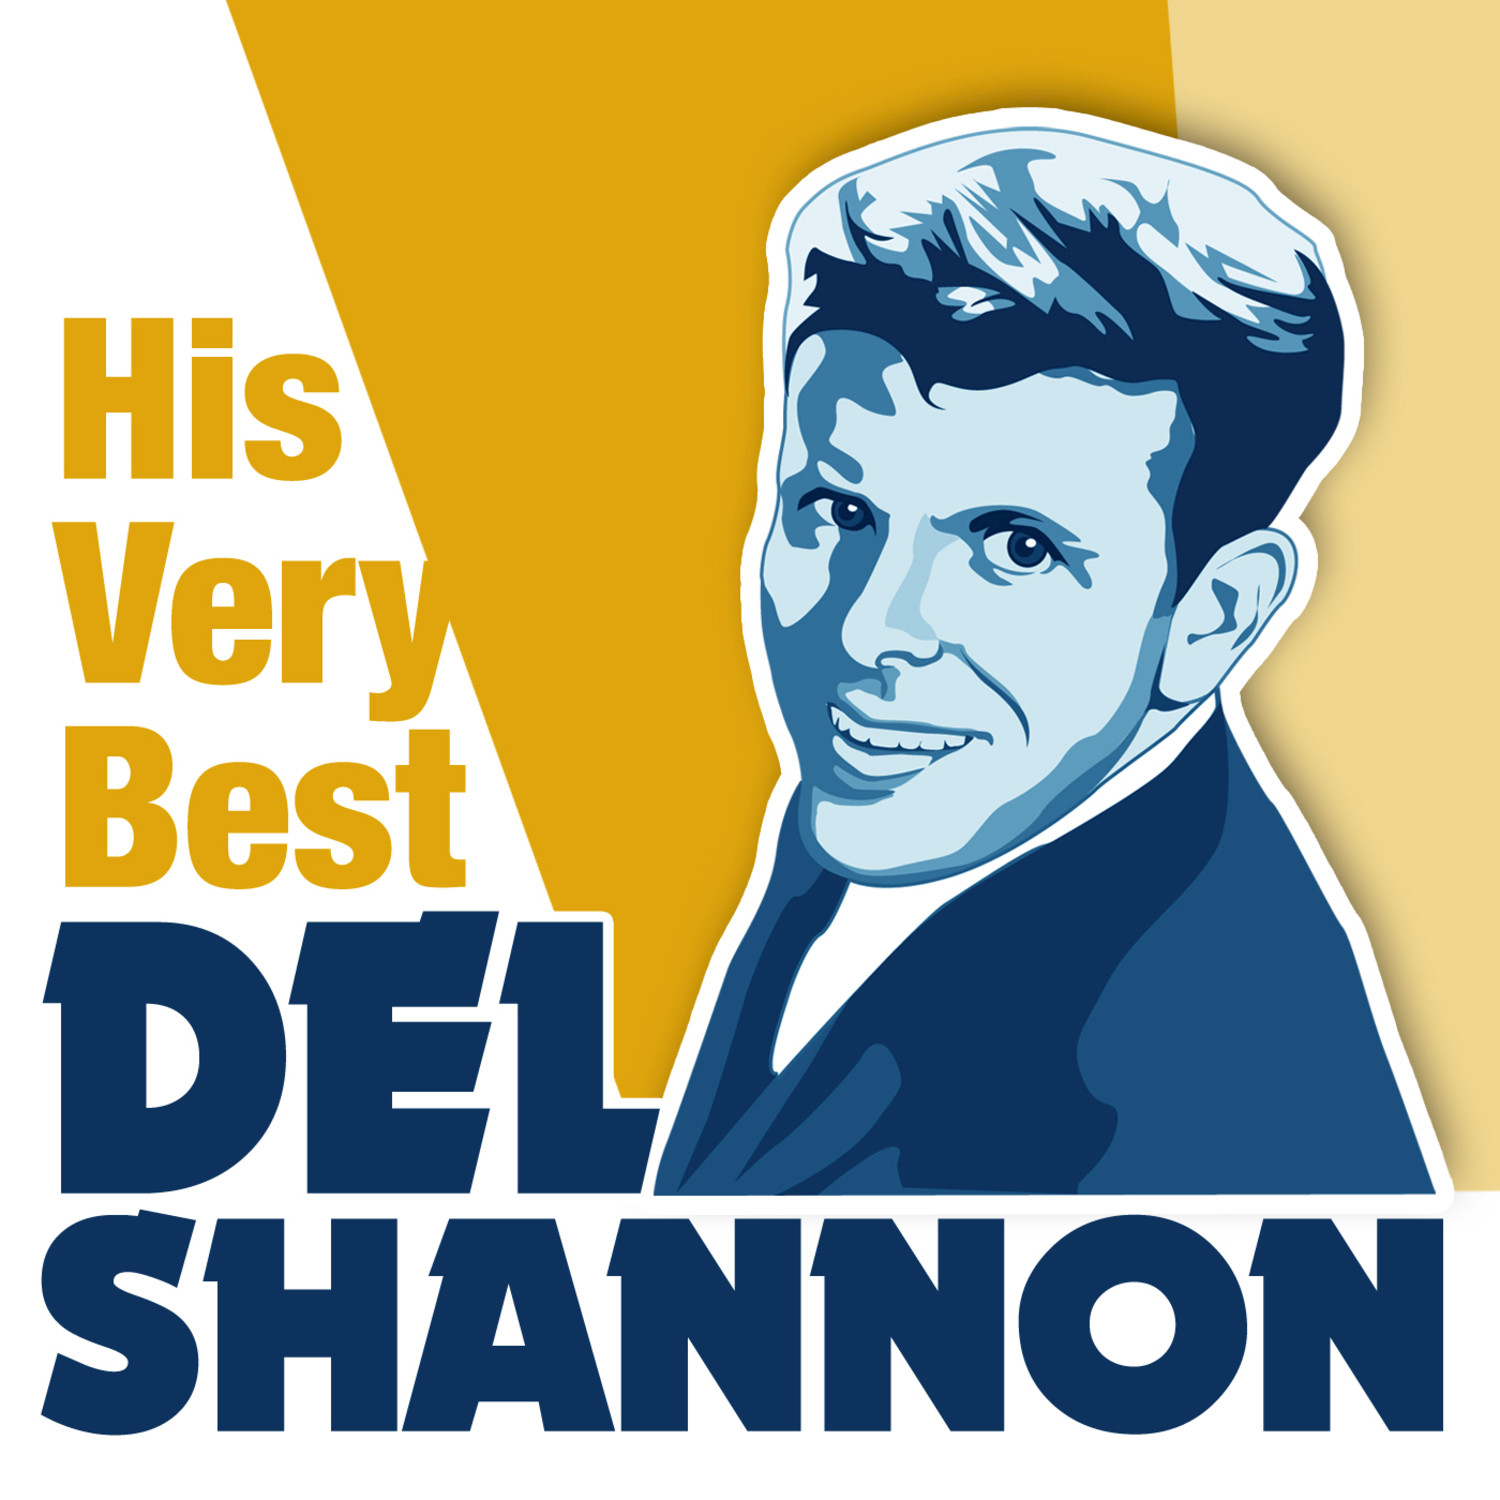 Del Shannon - His Very Best